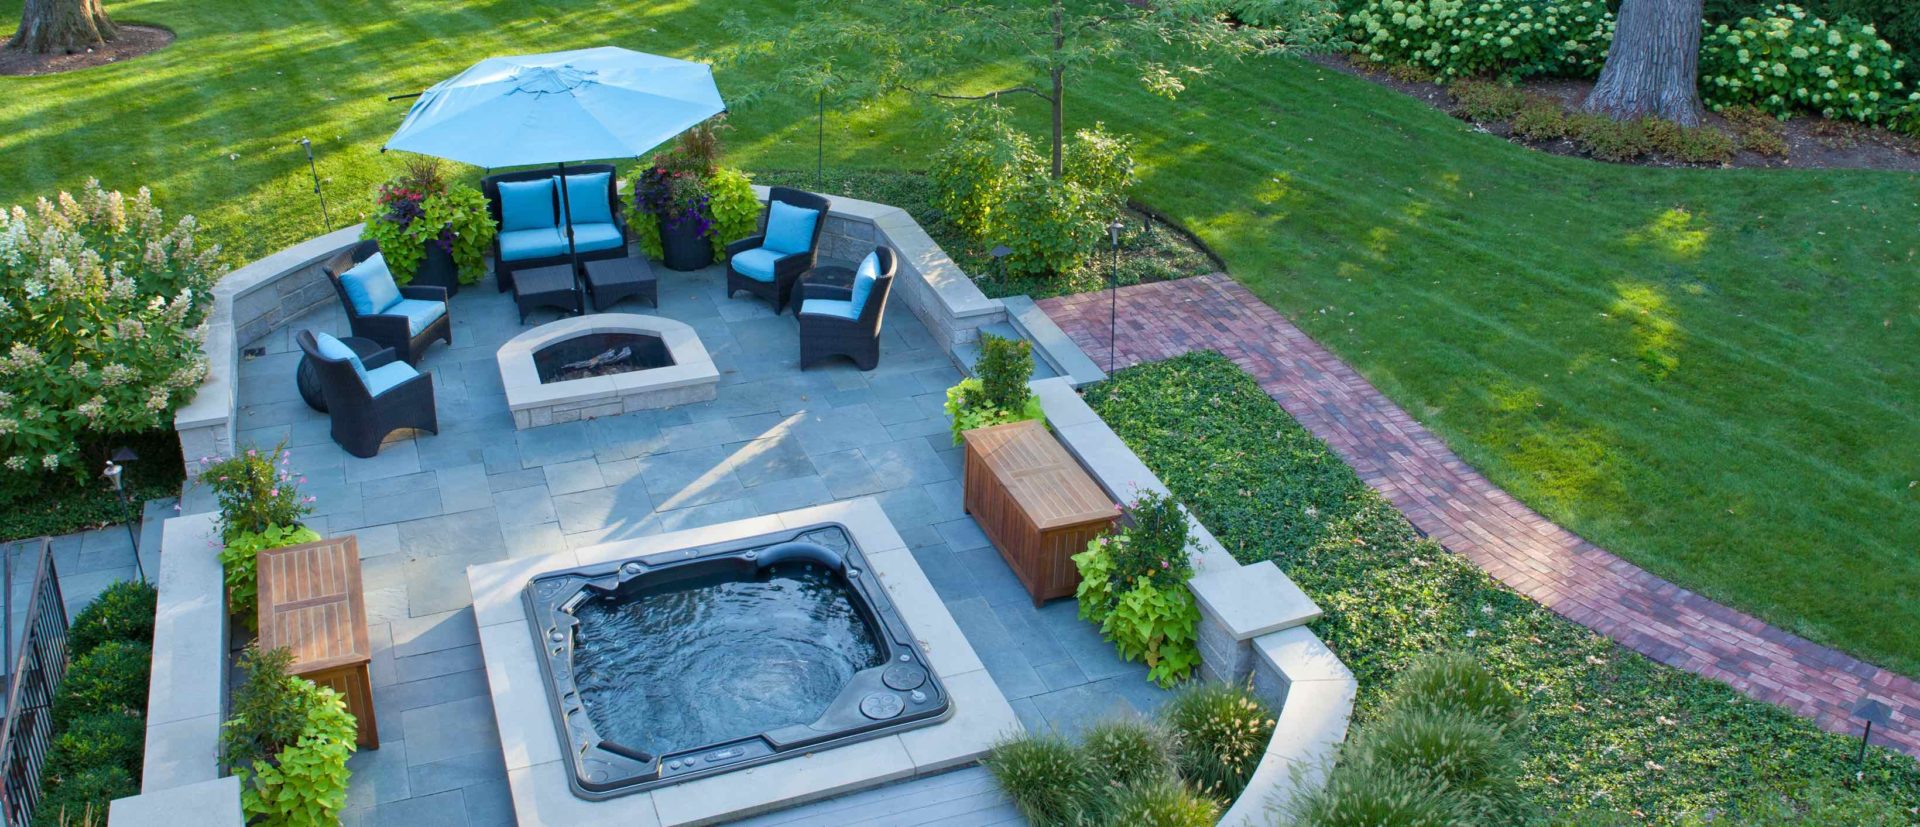 Patio with built-in hot tub